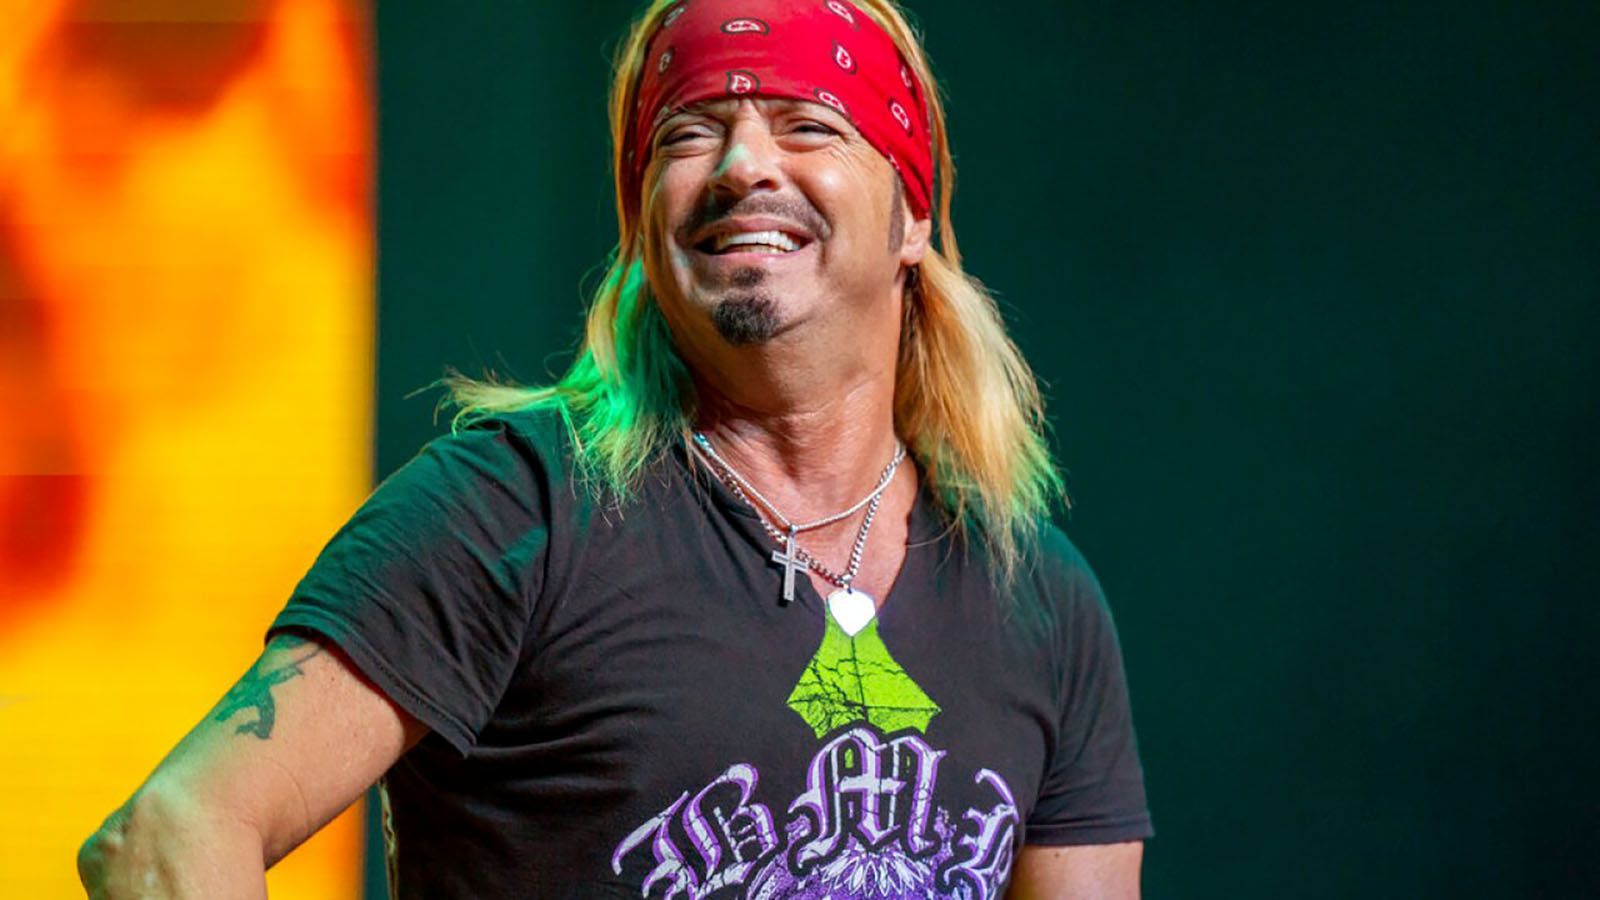 Bret Michaels will perform at the Fulton County Fair in Ohio.